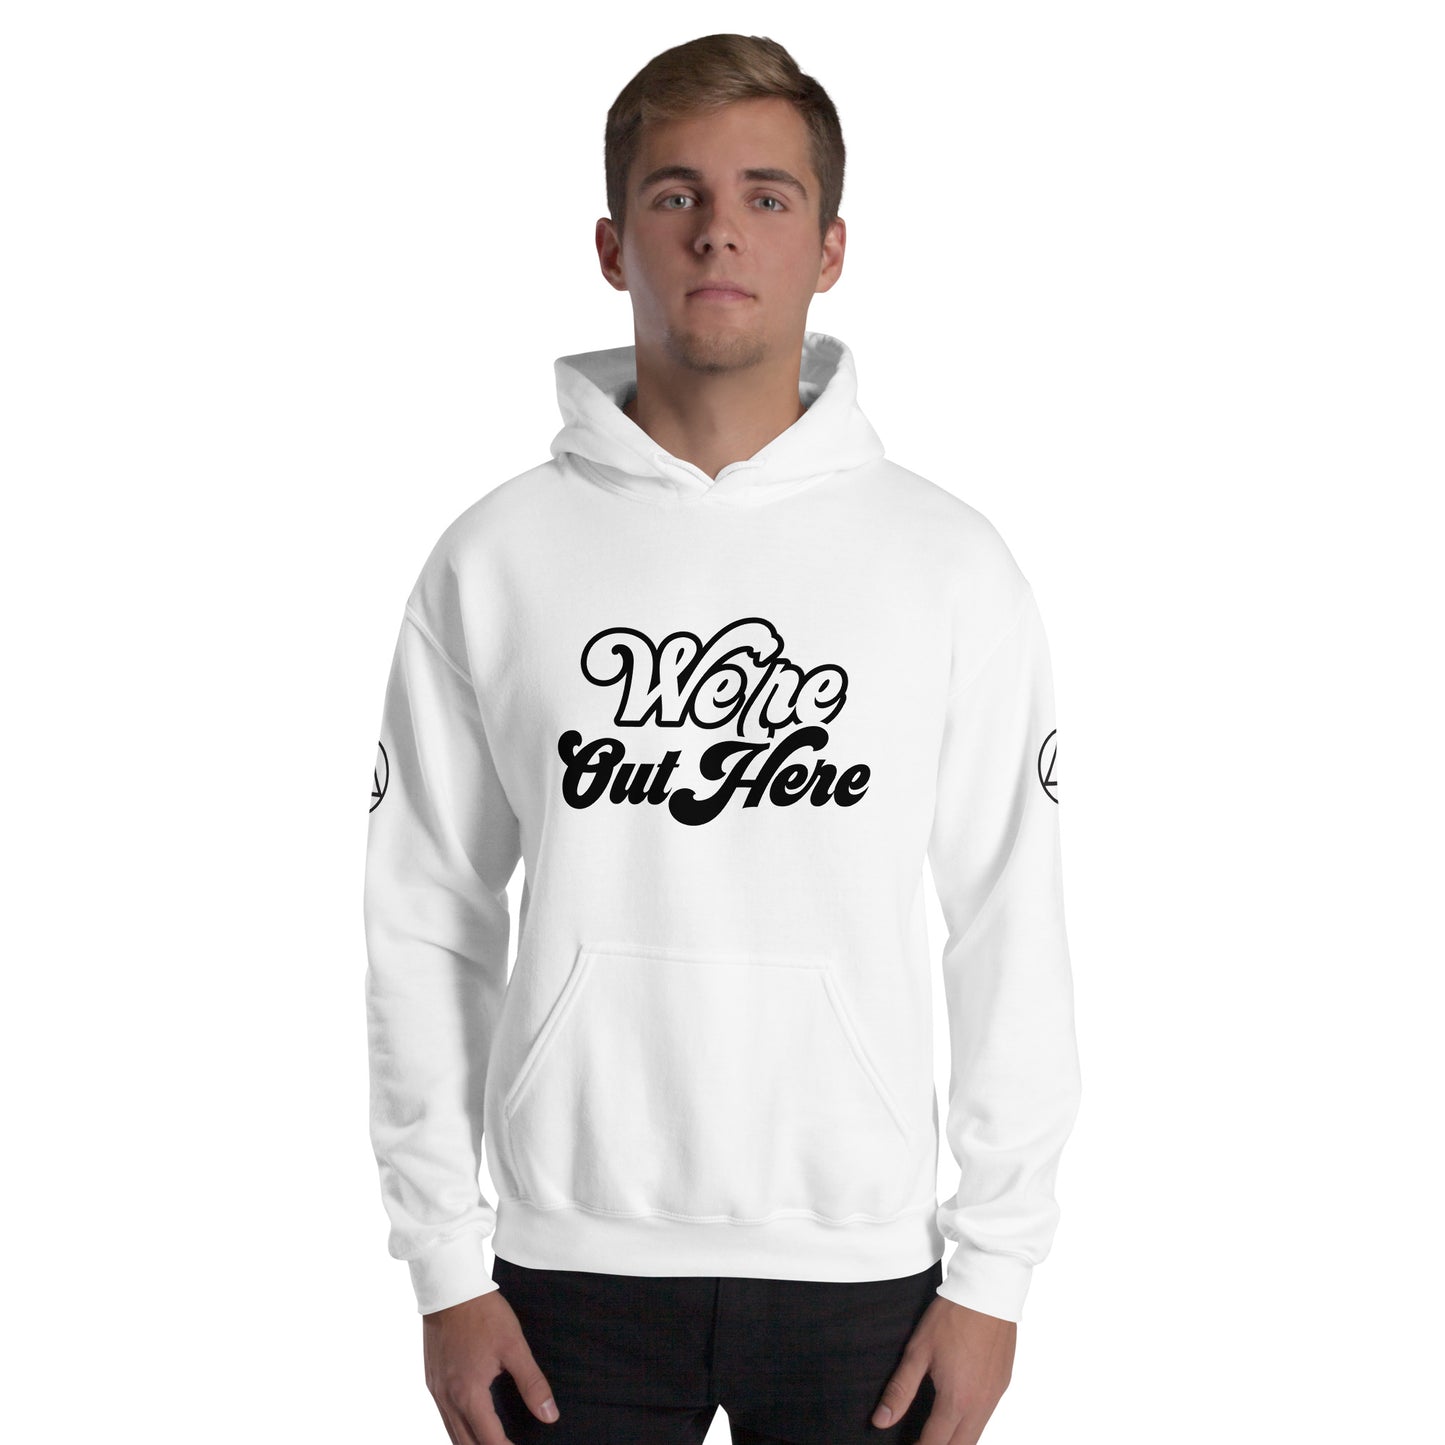 We're Out here Hoodie: Chuck's design!